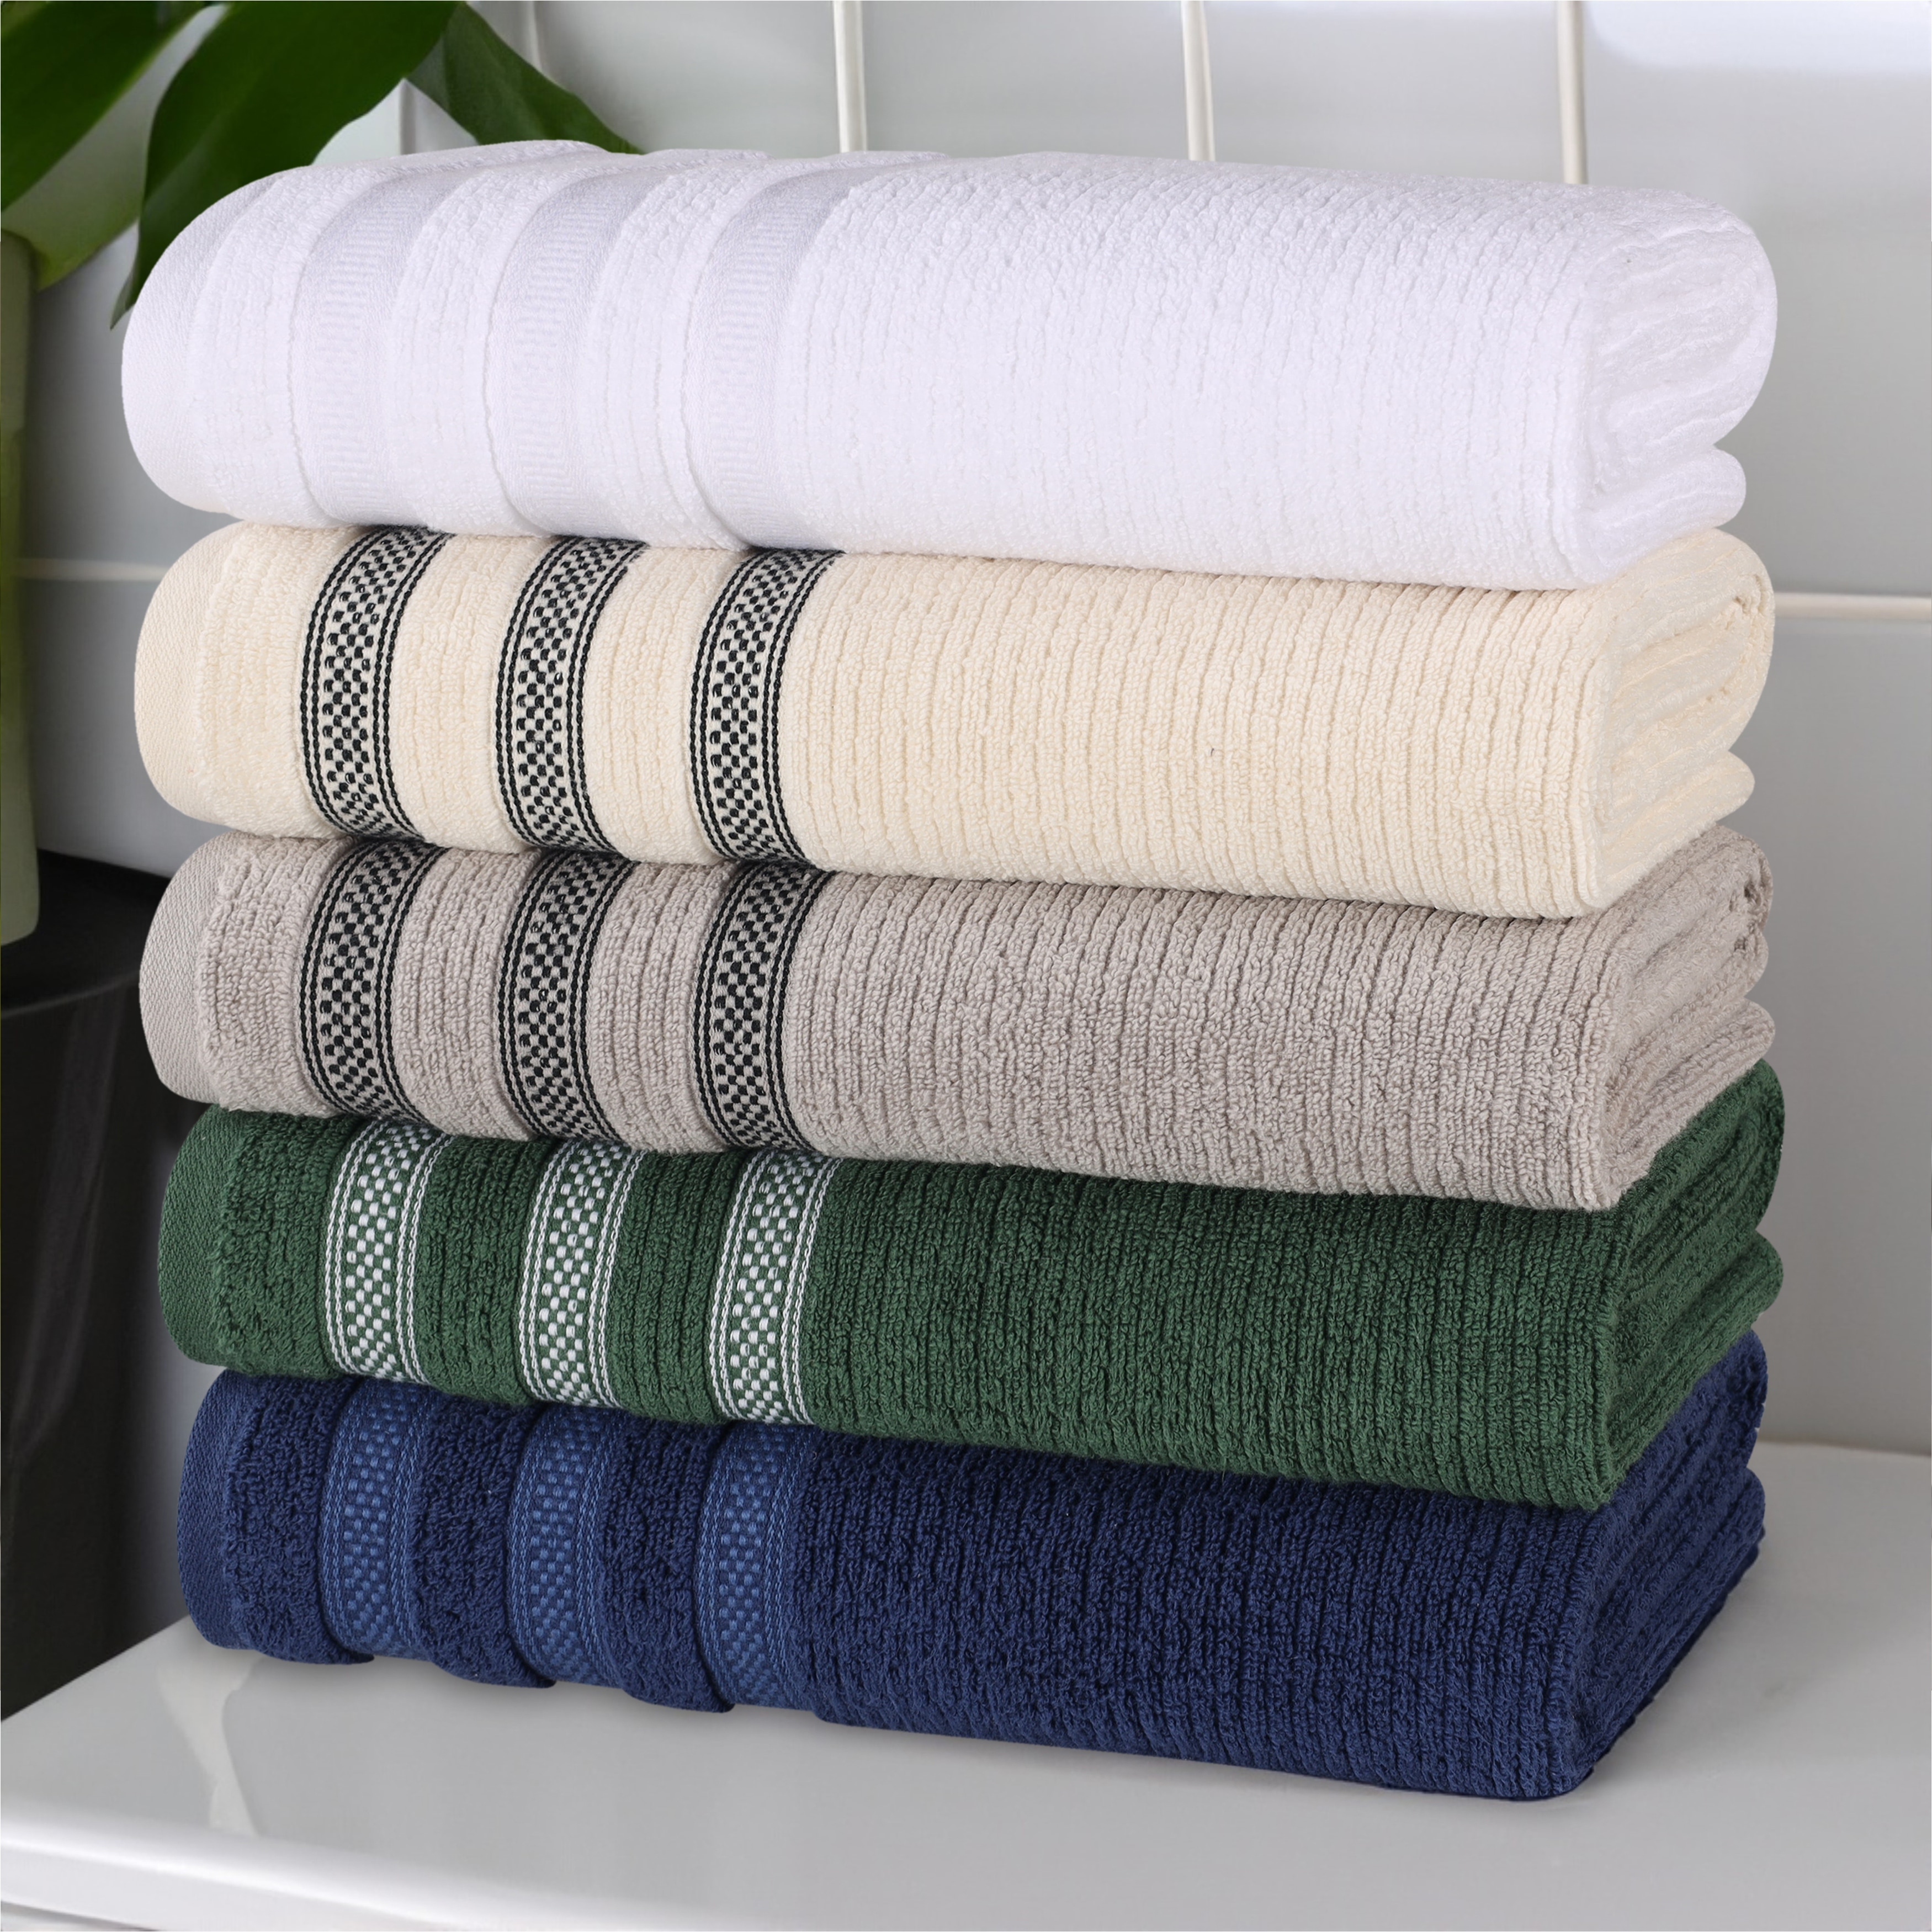 https://ak1.ostkcdn.com/images/products/is/images/direct/aed3e984f1efab67dd0e4d8fe7e5ce9e4652b0da/Superior-Brea-Zero-Twist-Cotton-Ribbed-Modern-Hand-Towel-Set-of-6.jpg